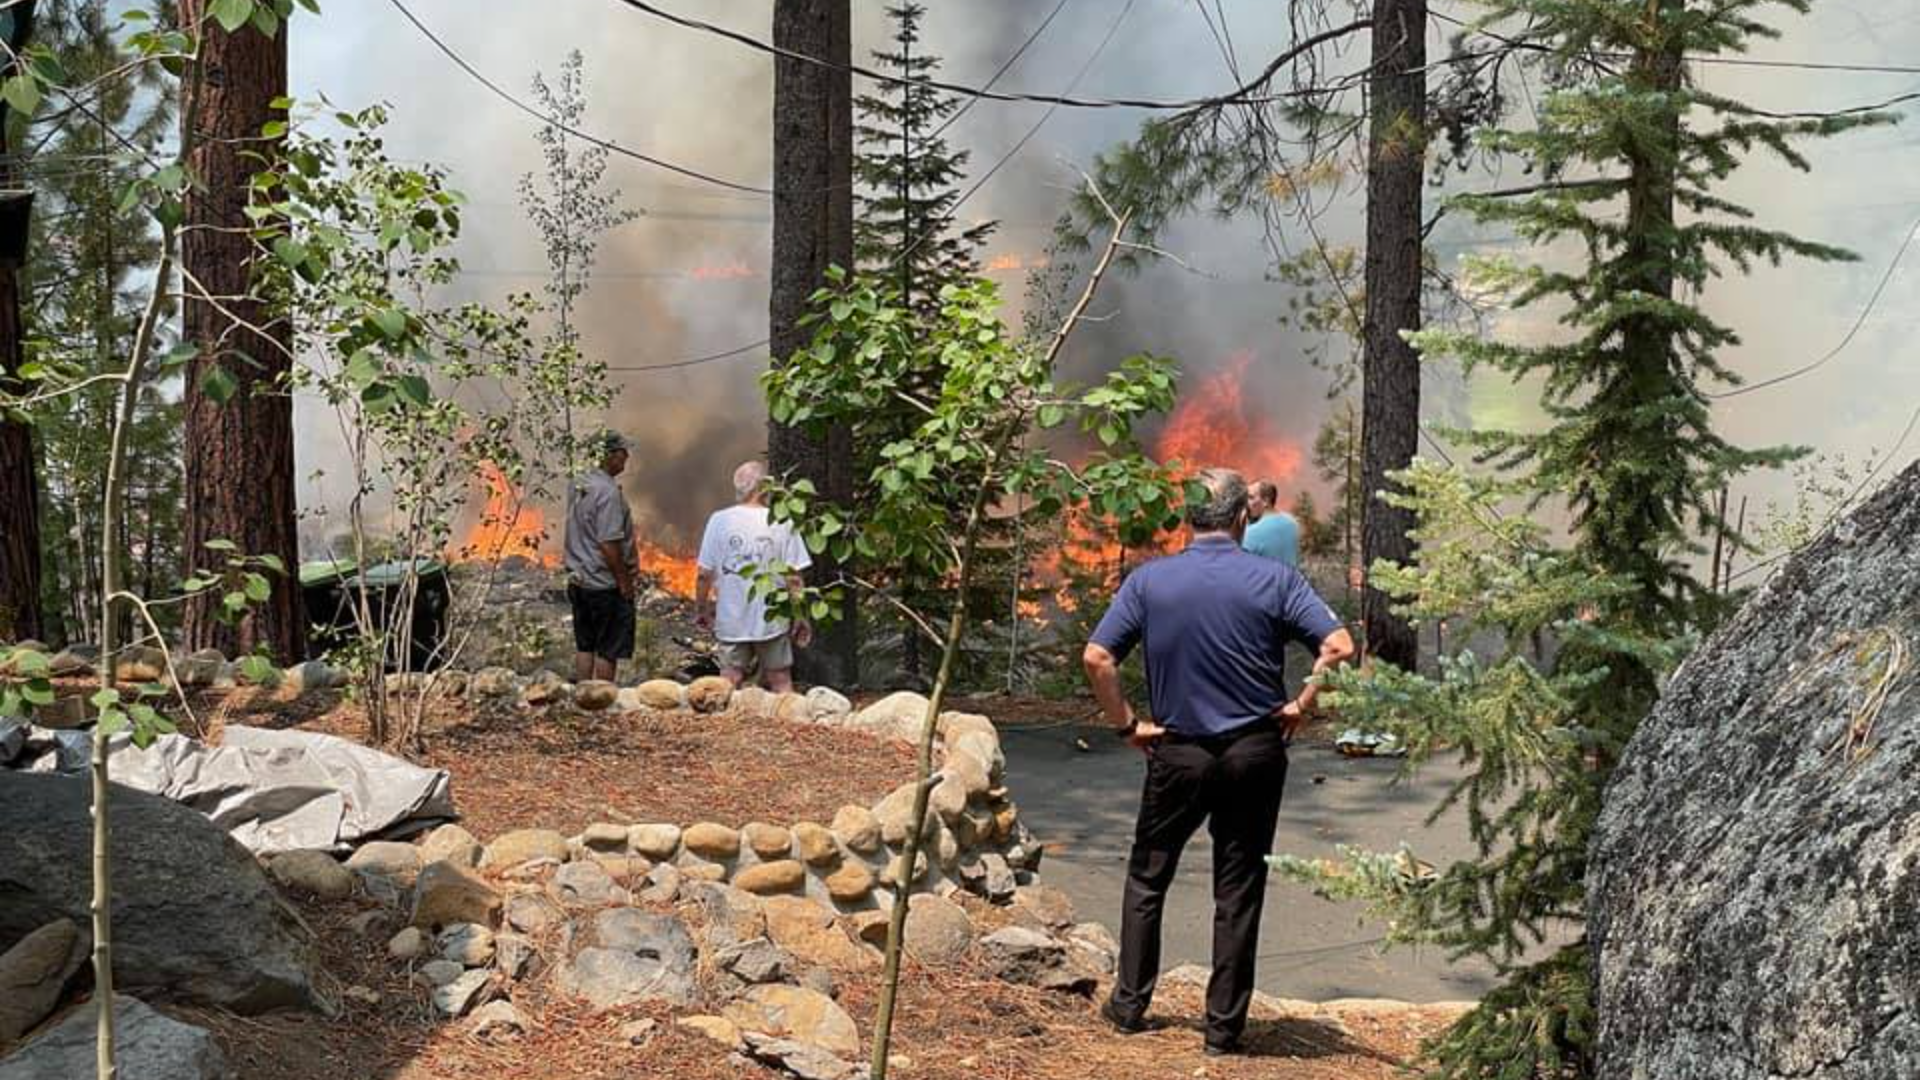 A private jet crashed near the Ponderosa Golf Course in Truckee on Monday as it was attempting to land at the Truckee-Tahoe Airport. There were no survivors.